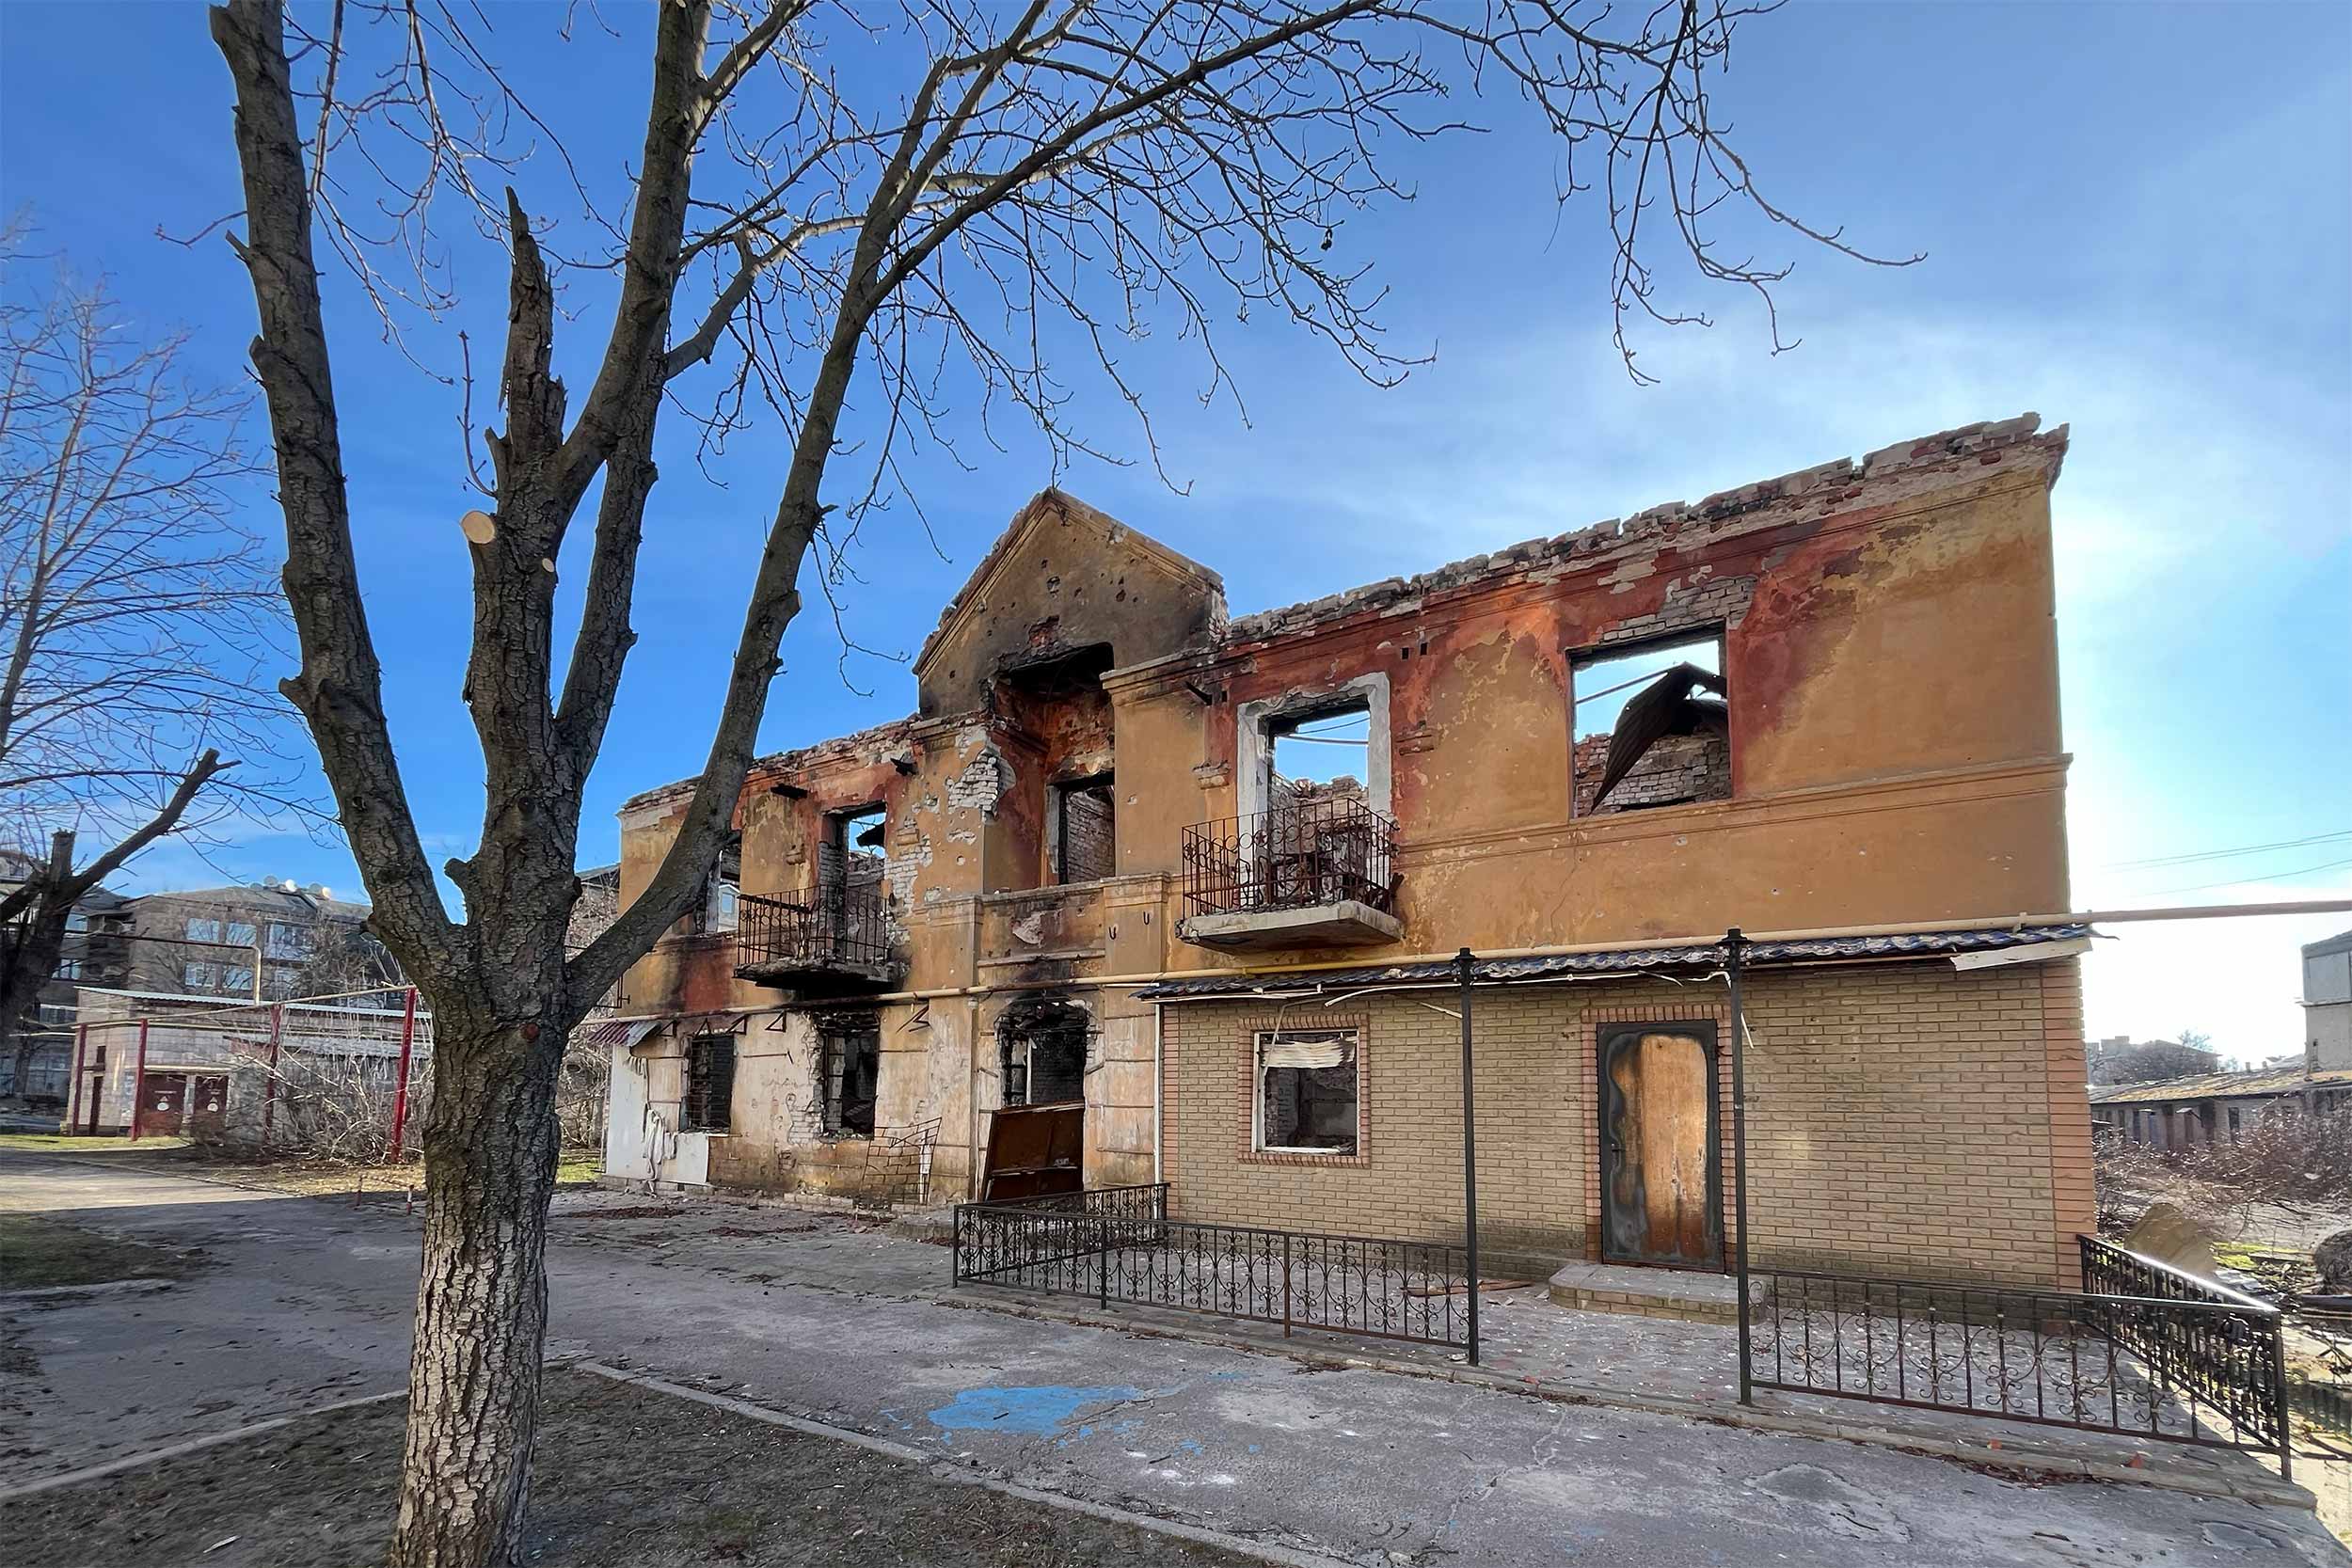 Nearly 80 per cent of the population of Lyman and surrounding villages have fled, giving the frontline town in eastern Ukraine an empty feel, with many buildings damaged by Russian shelling over the past two years. © Anthony Borden